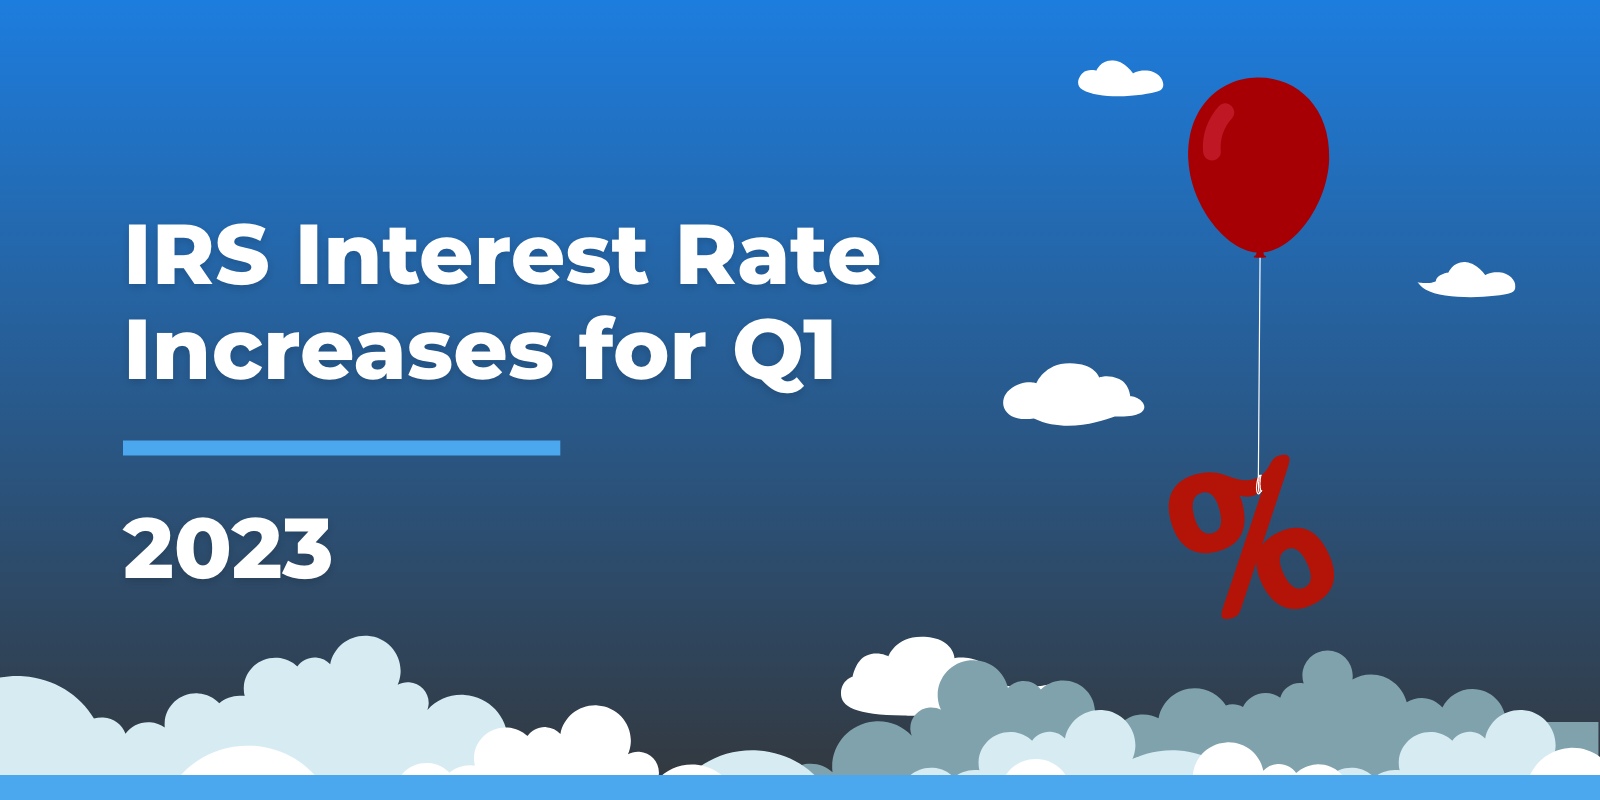 irs interest rate increases for q1 of 2023